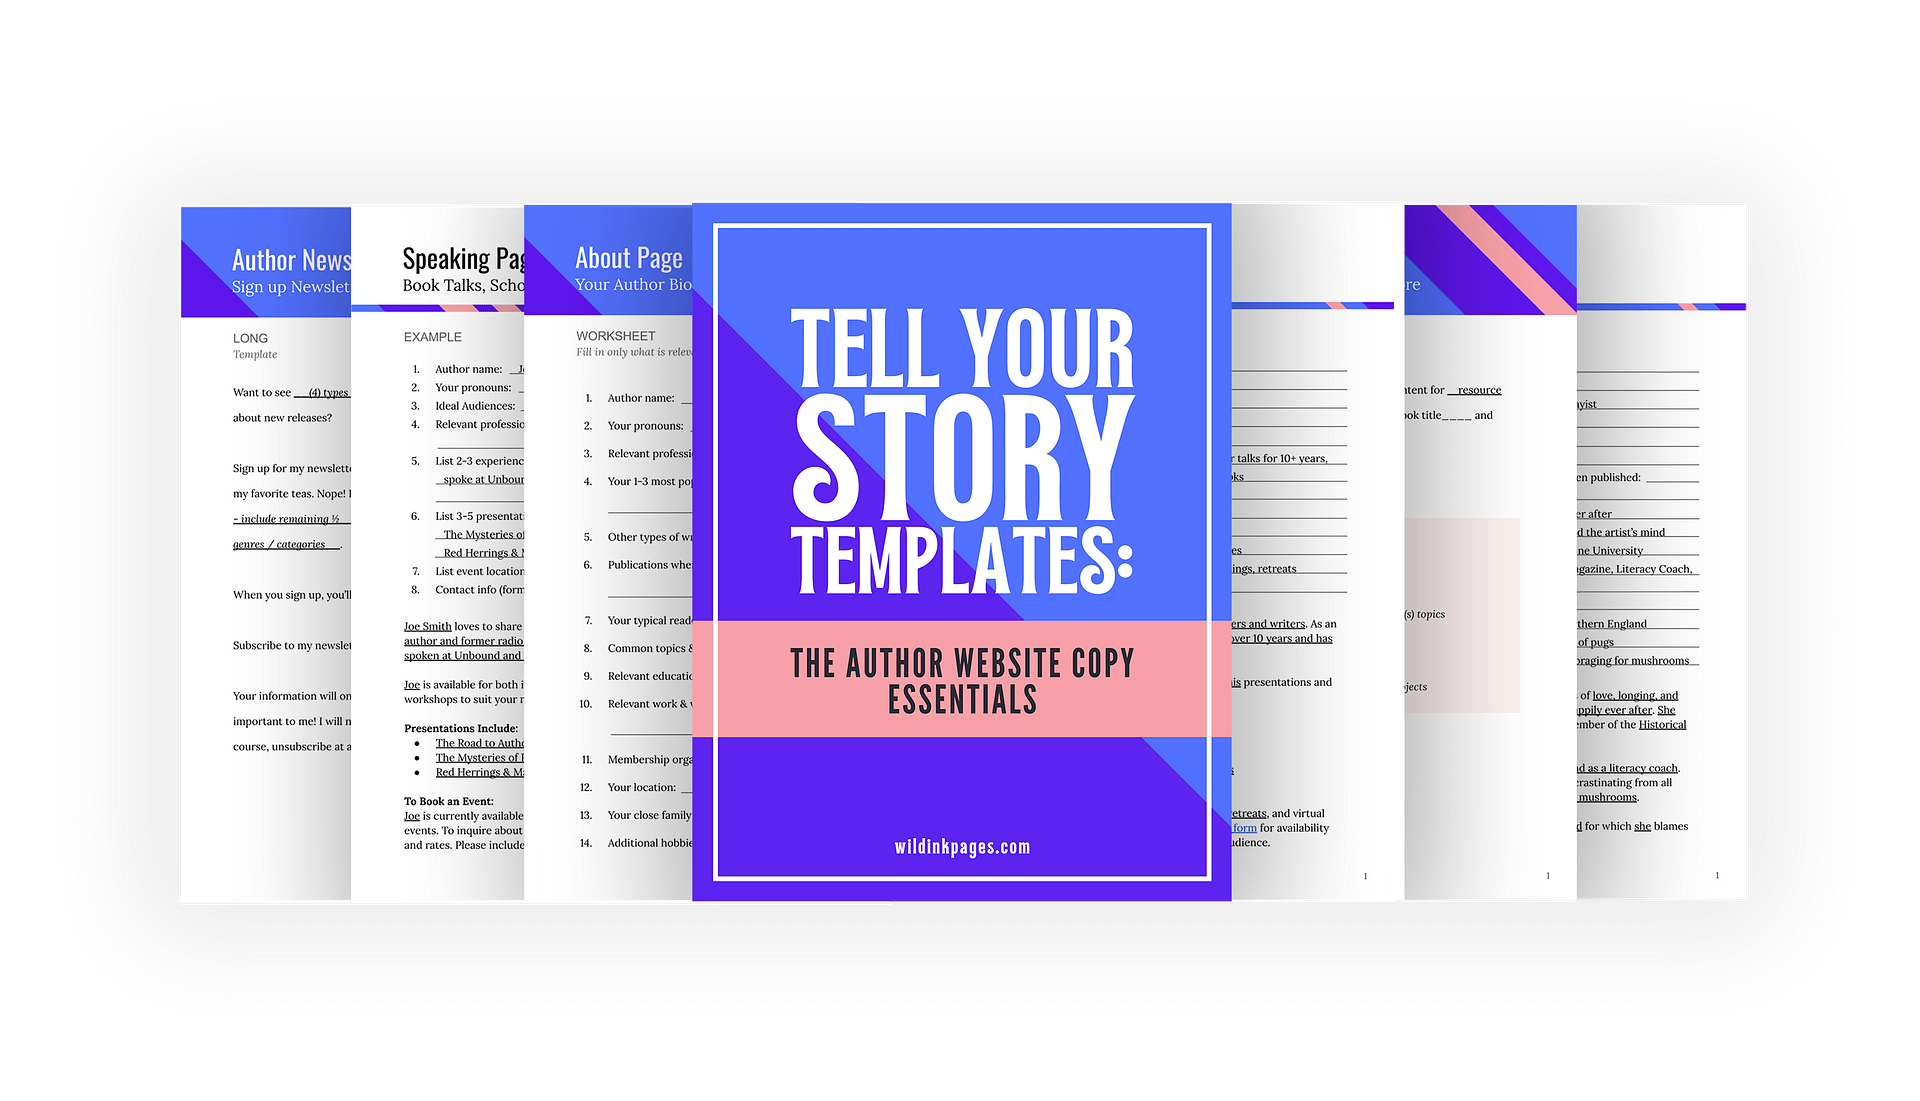 Tell Your Story Templates